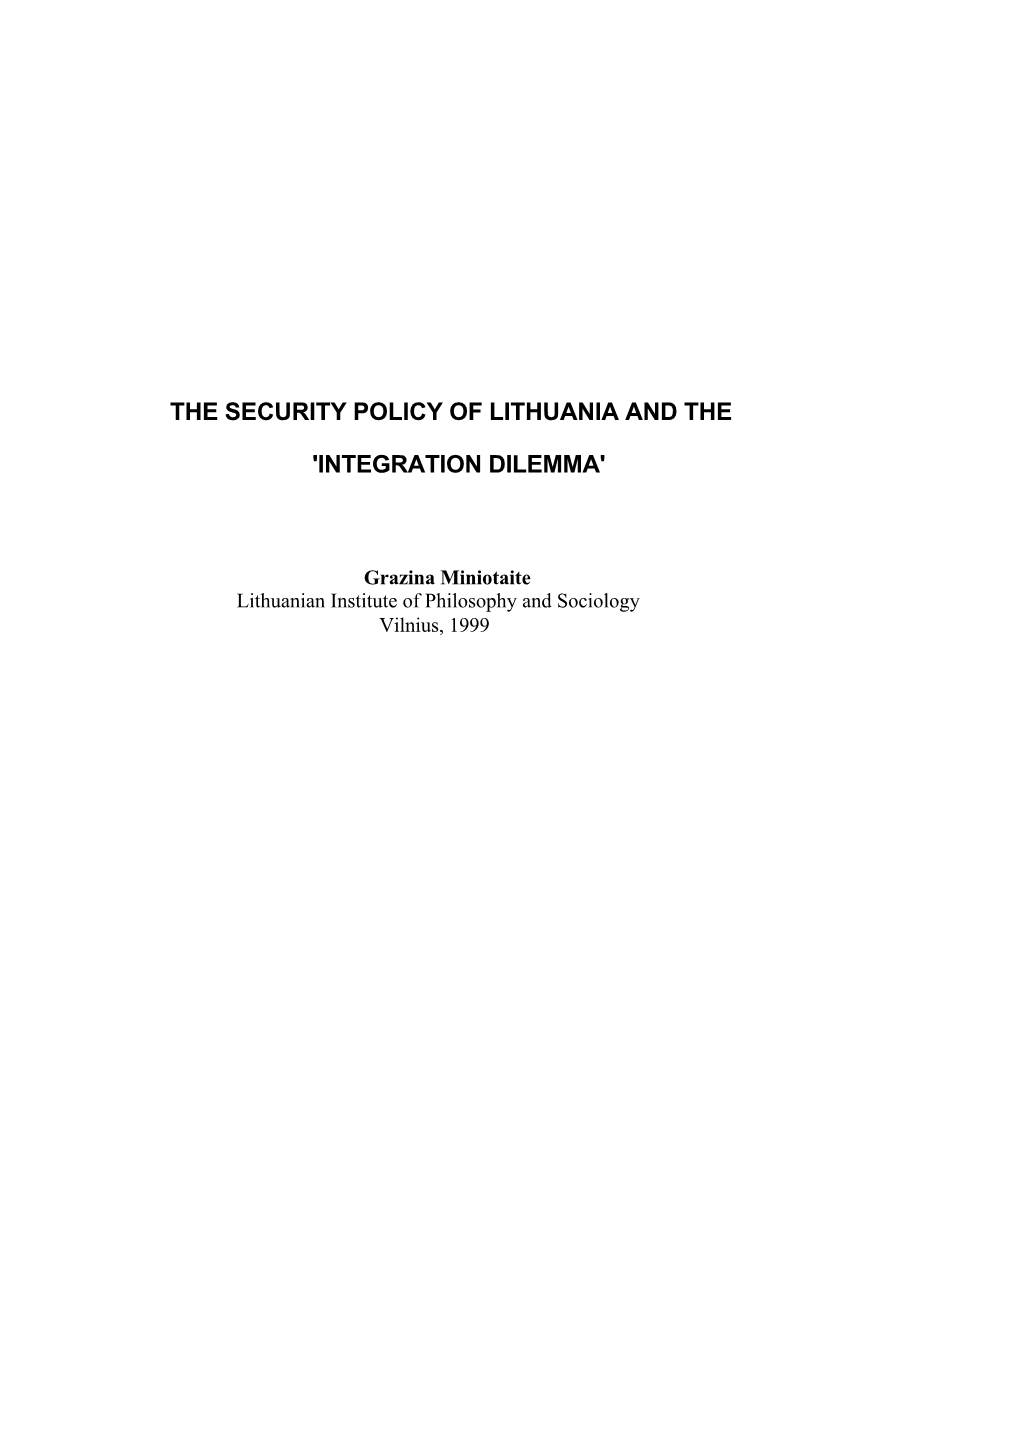 The Security Policy of Lithuania and The